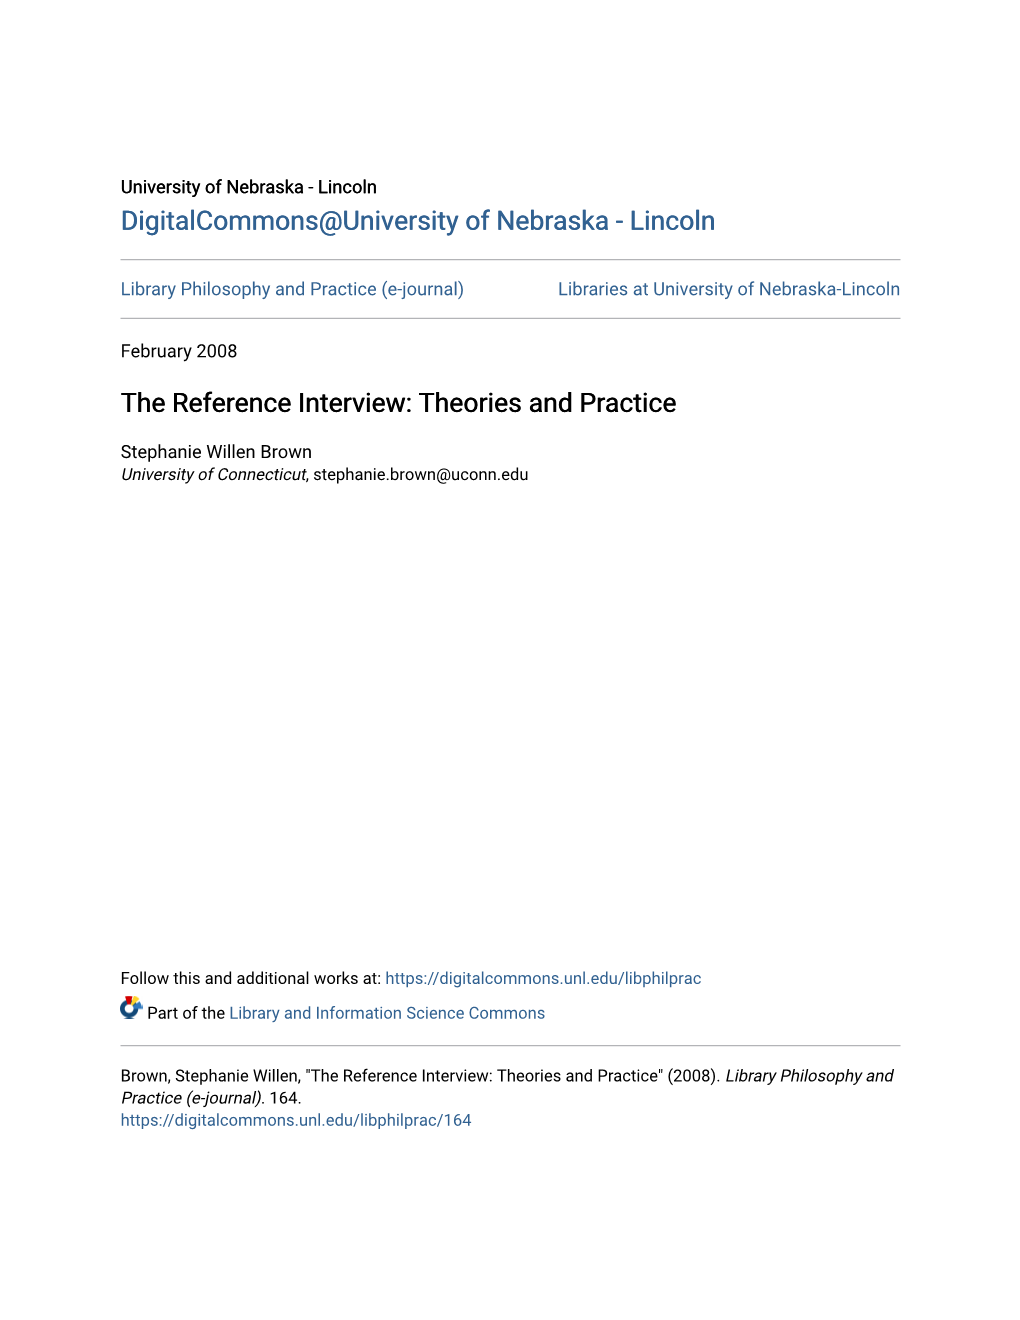 The Reference Interview: Theories and Practice